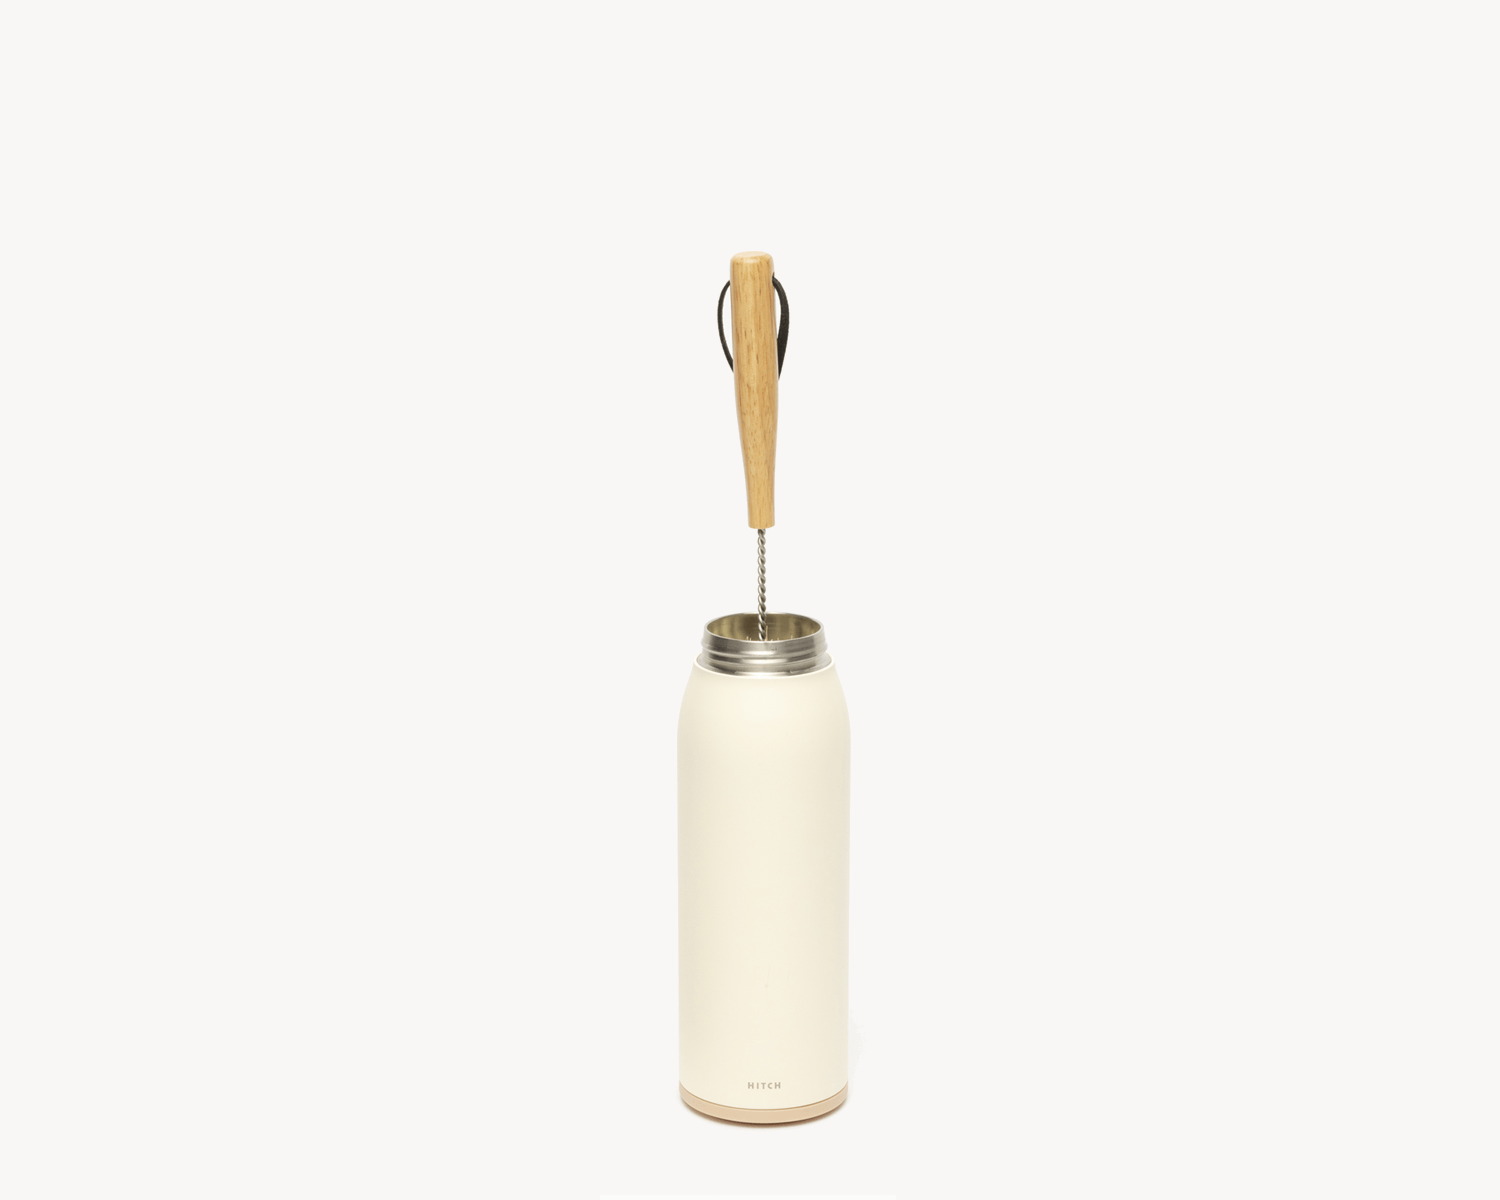 Hitch Bottle Brush with Natural Sisal Fibers, a stainless steel rod, and wooden handle inside Hitch Bottle and Cup in Natural White